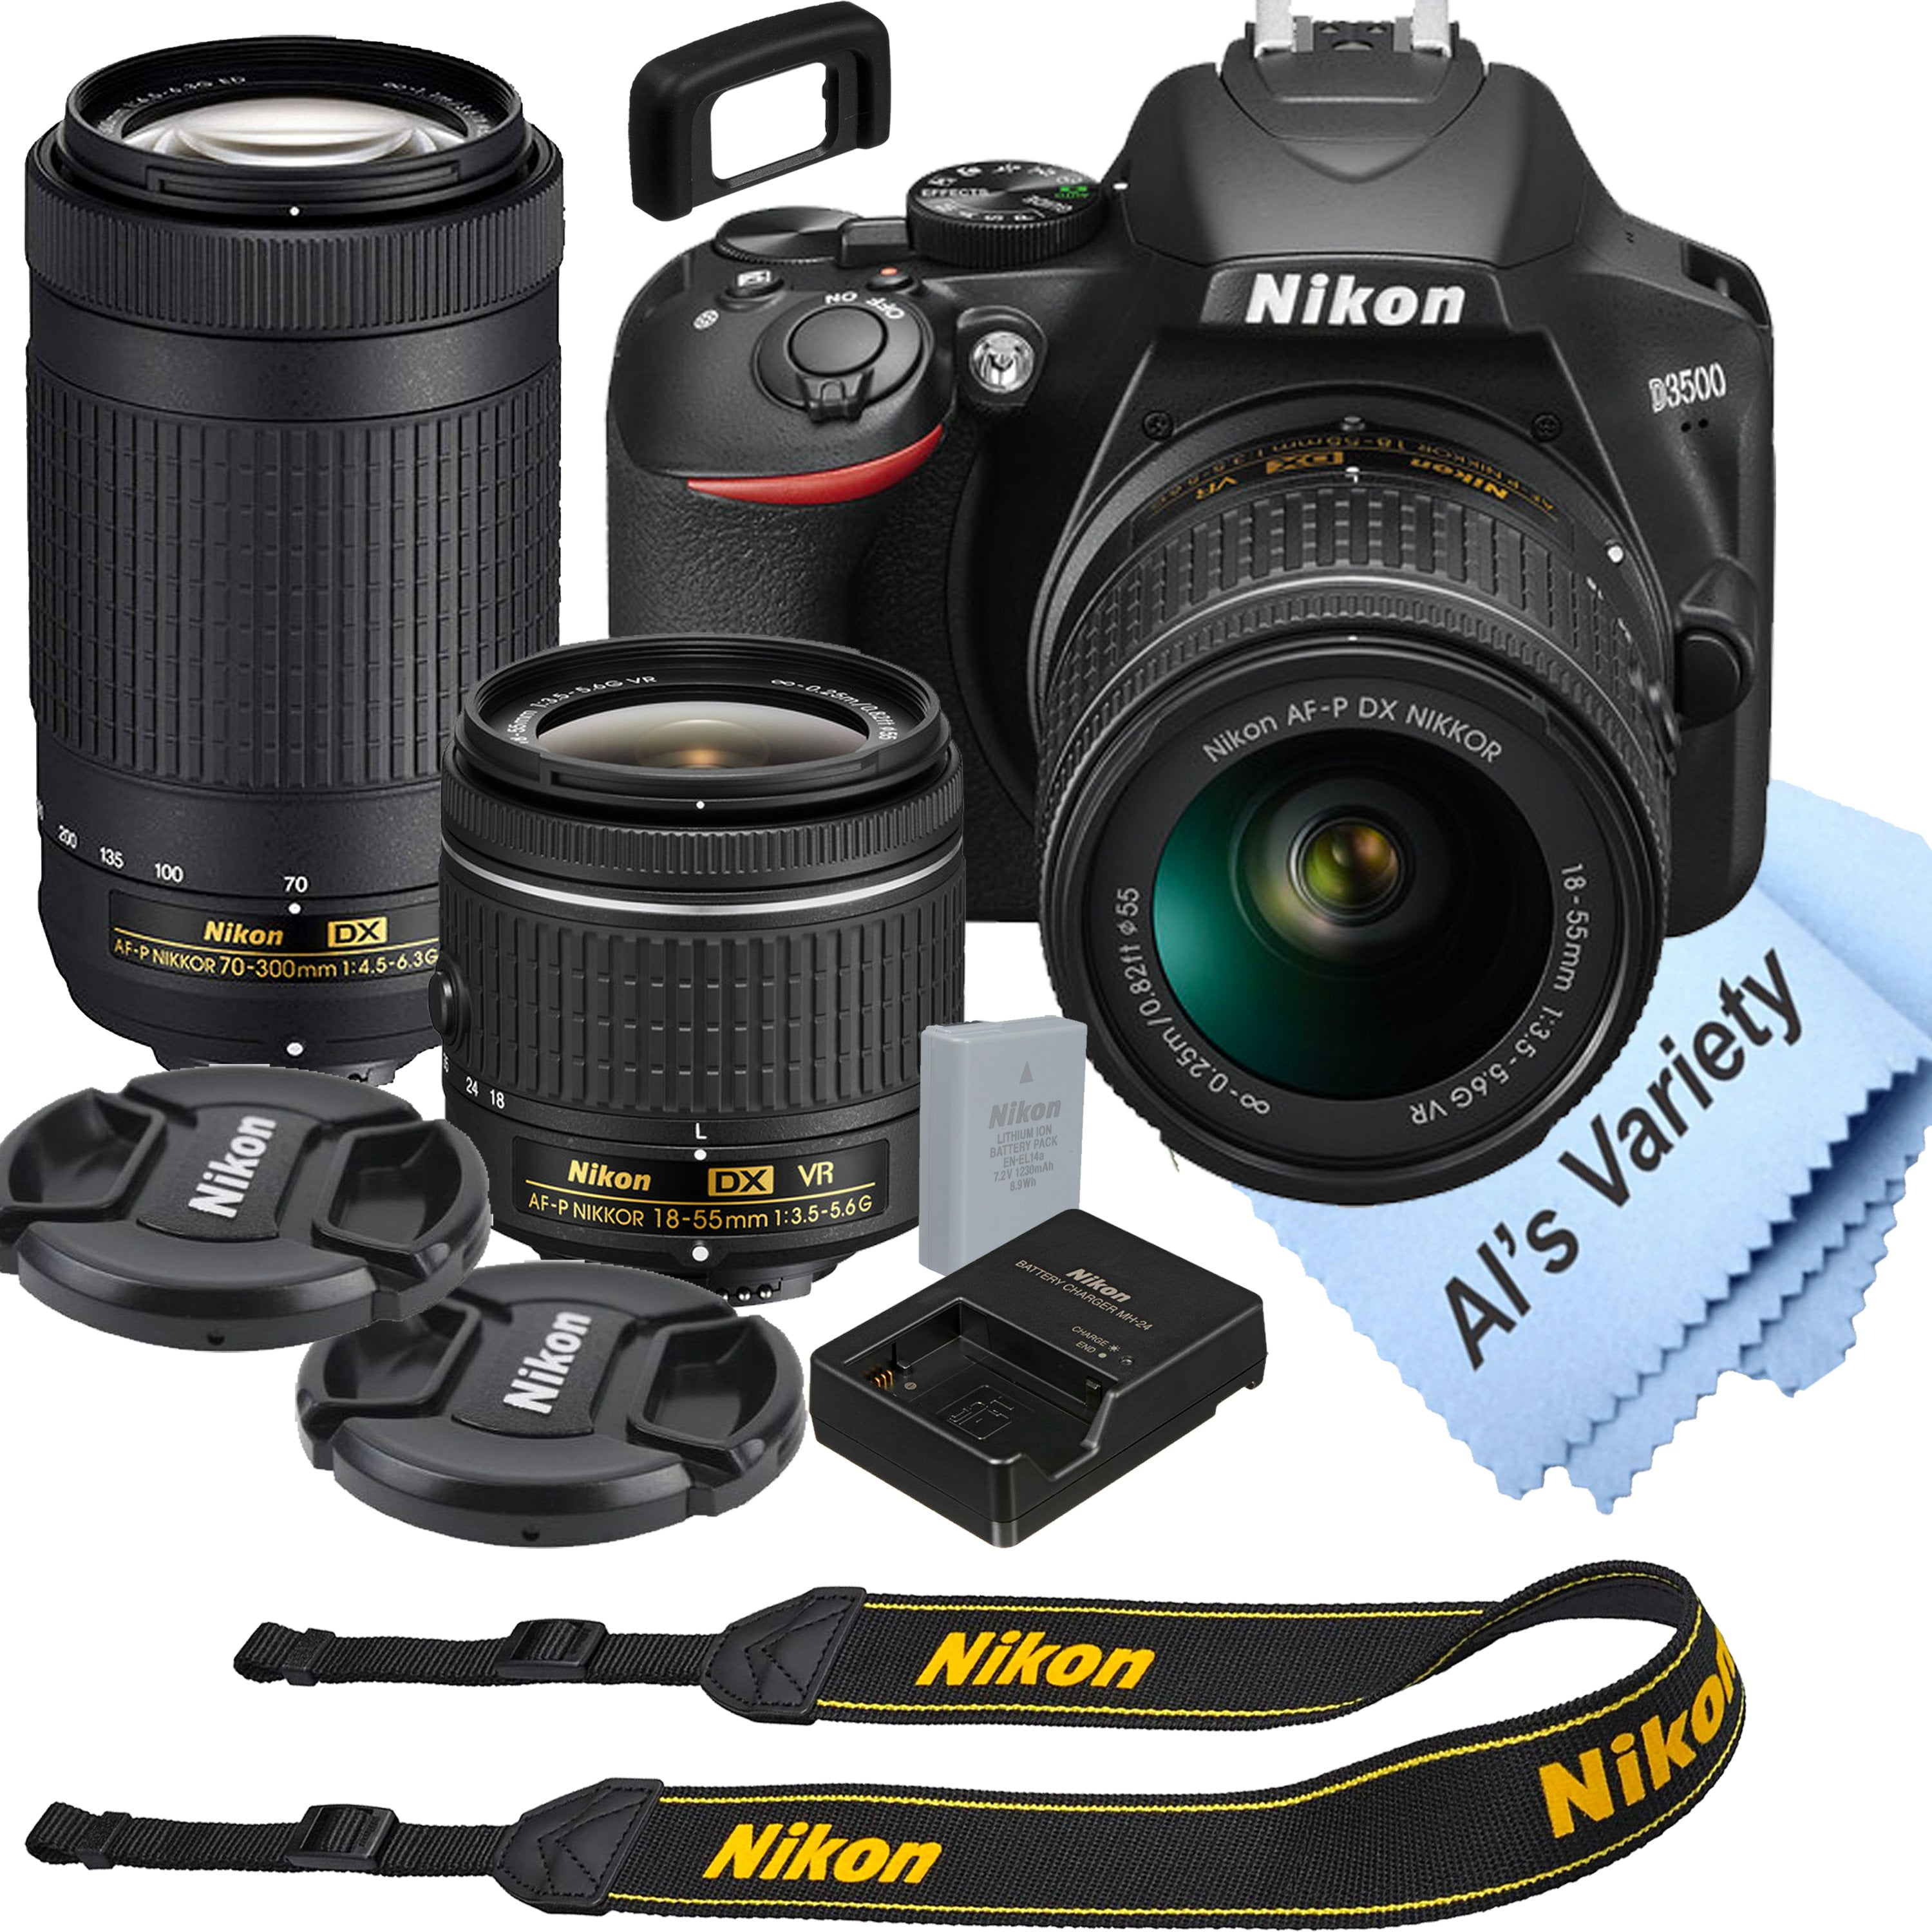 Nikon D3500 DSLR Camera Kit with 18-55mm VR + 70-300mm Zoom Lenses Built-in  Wi-Fi24.2 MP CMOS Sensor EXPEED 4 Image Processor and Full HD 1080p Video  